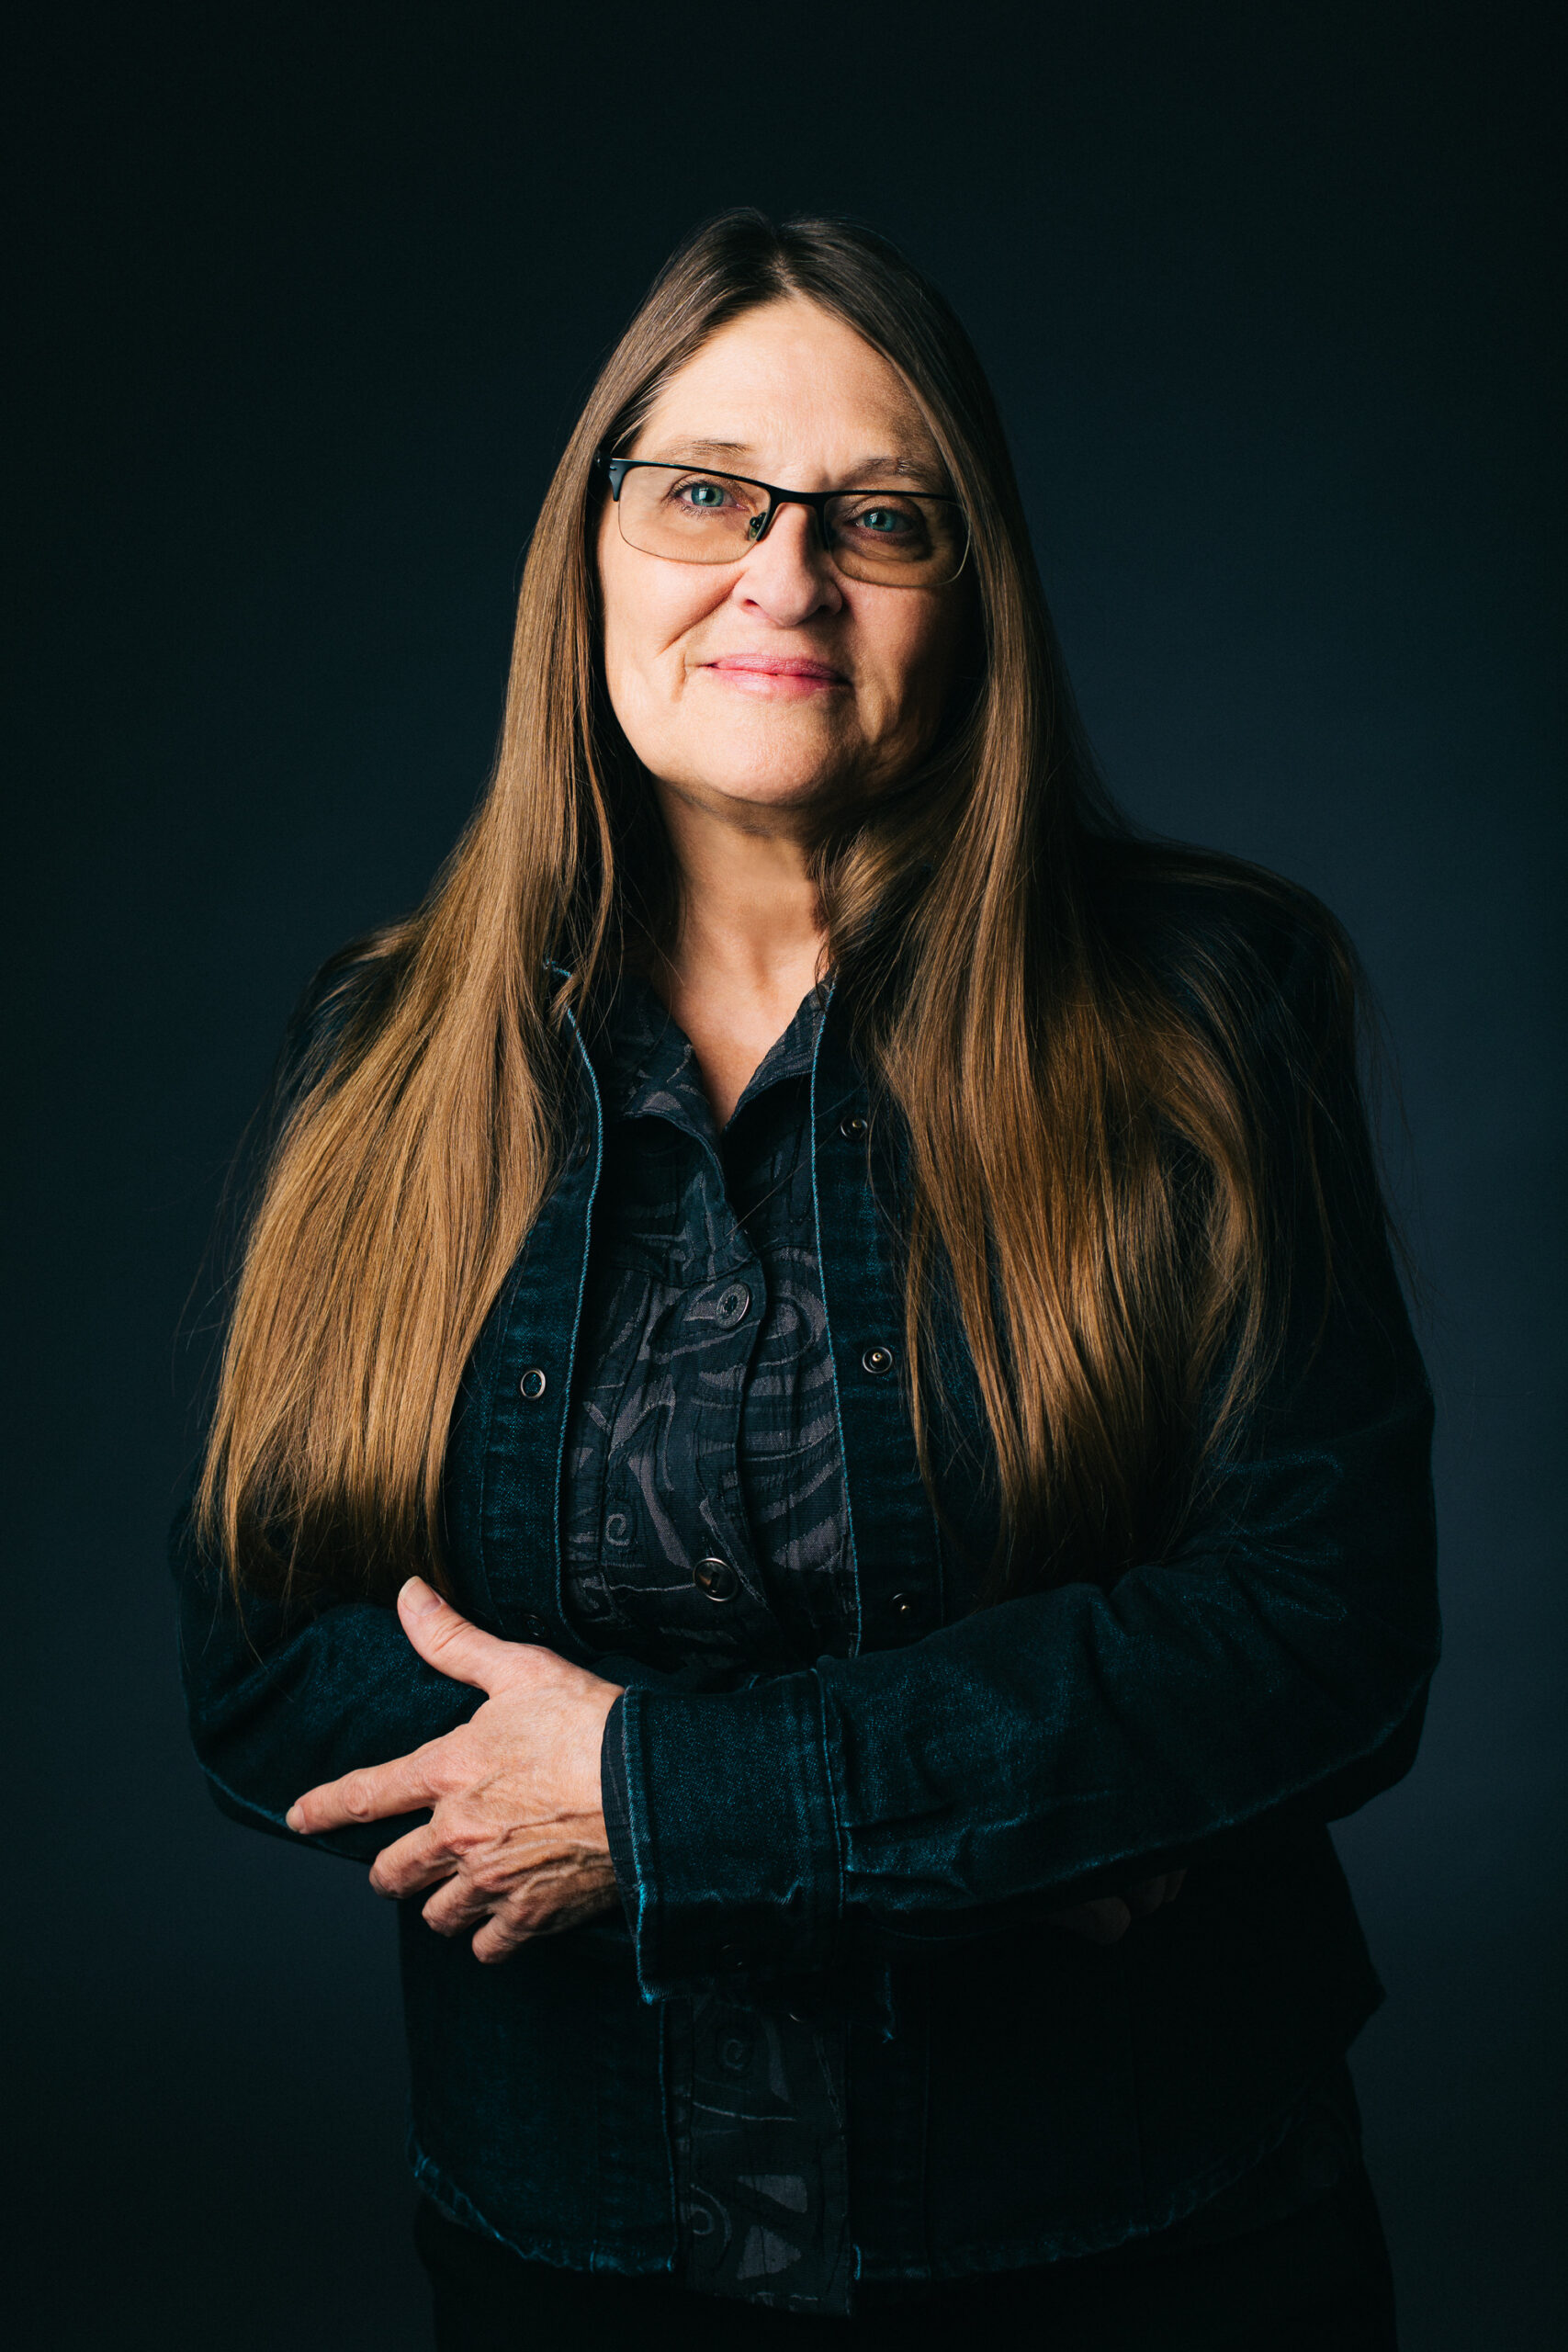 Allison Adelle Hedge Coke's headshot: a woman with long brown hair and glasses smiling at the camera.